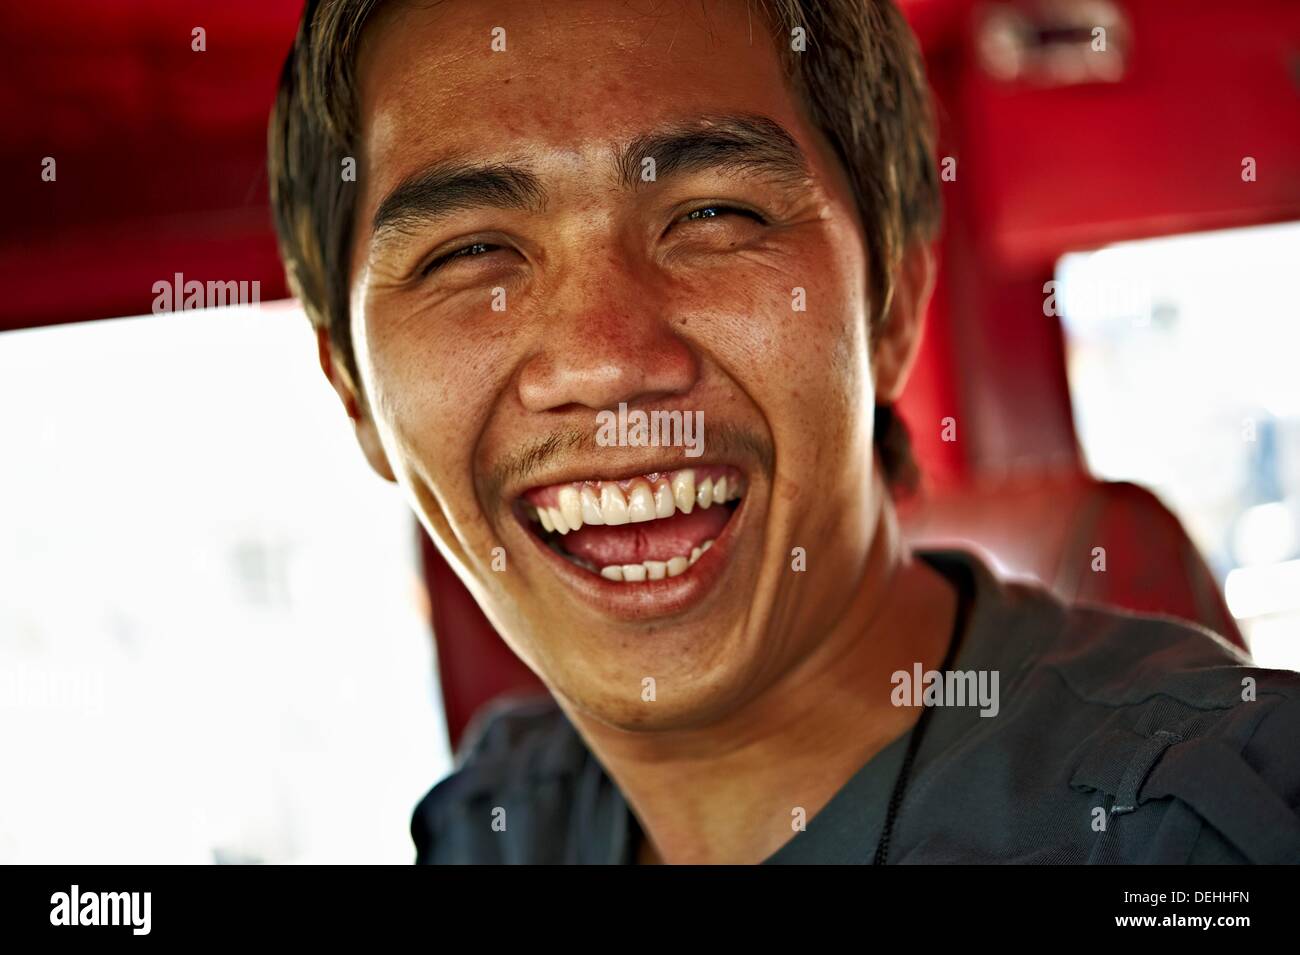 Jeepney driver laugh and look in camera  Mandaluyong City  Metro Manila  Philippines Stock Photo